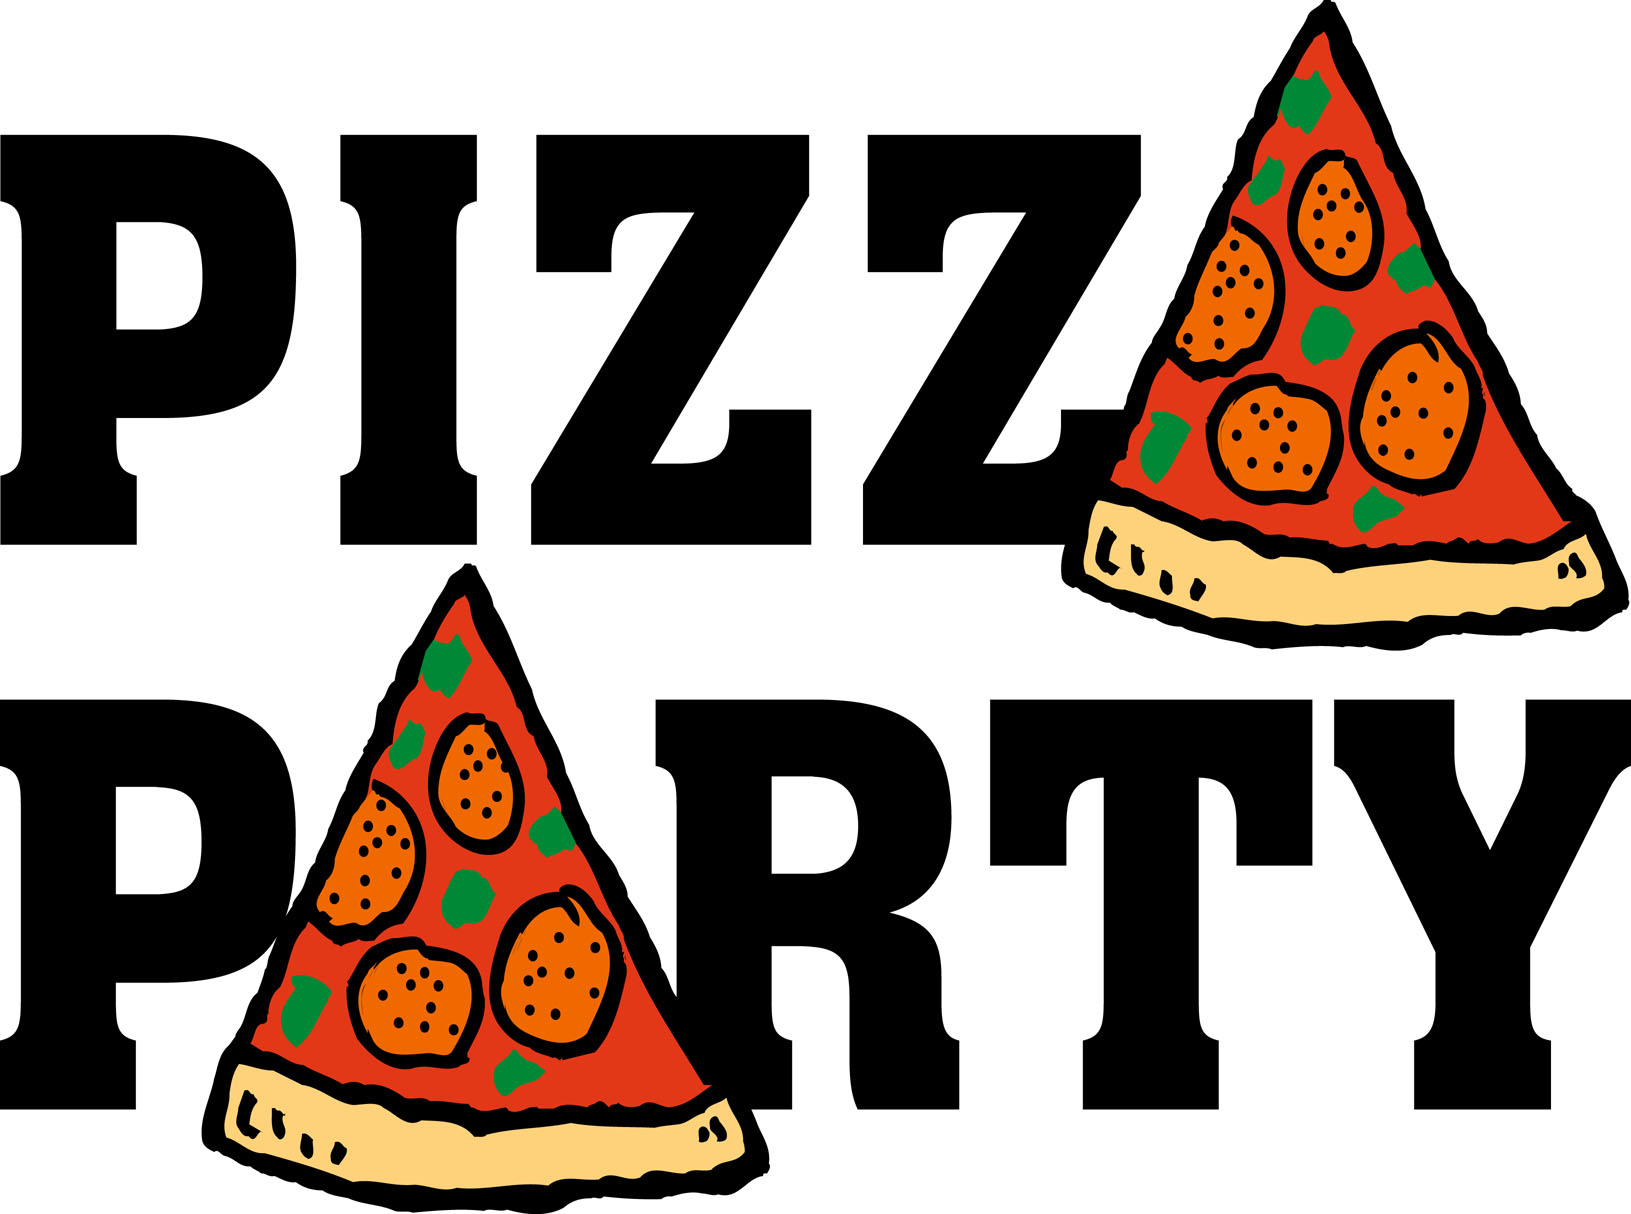 pizza-party-clipart-PizzaParty.jpg